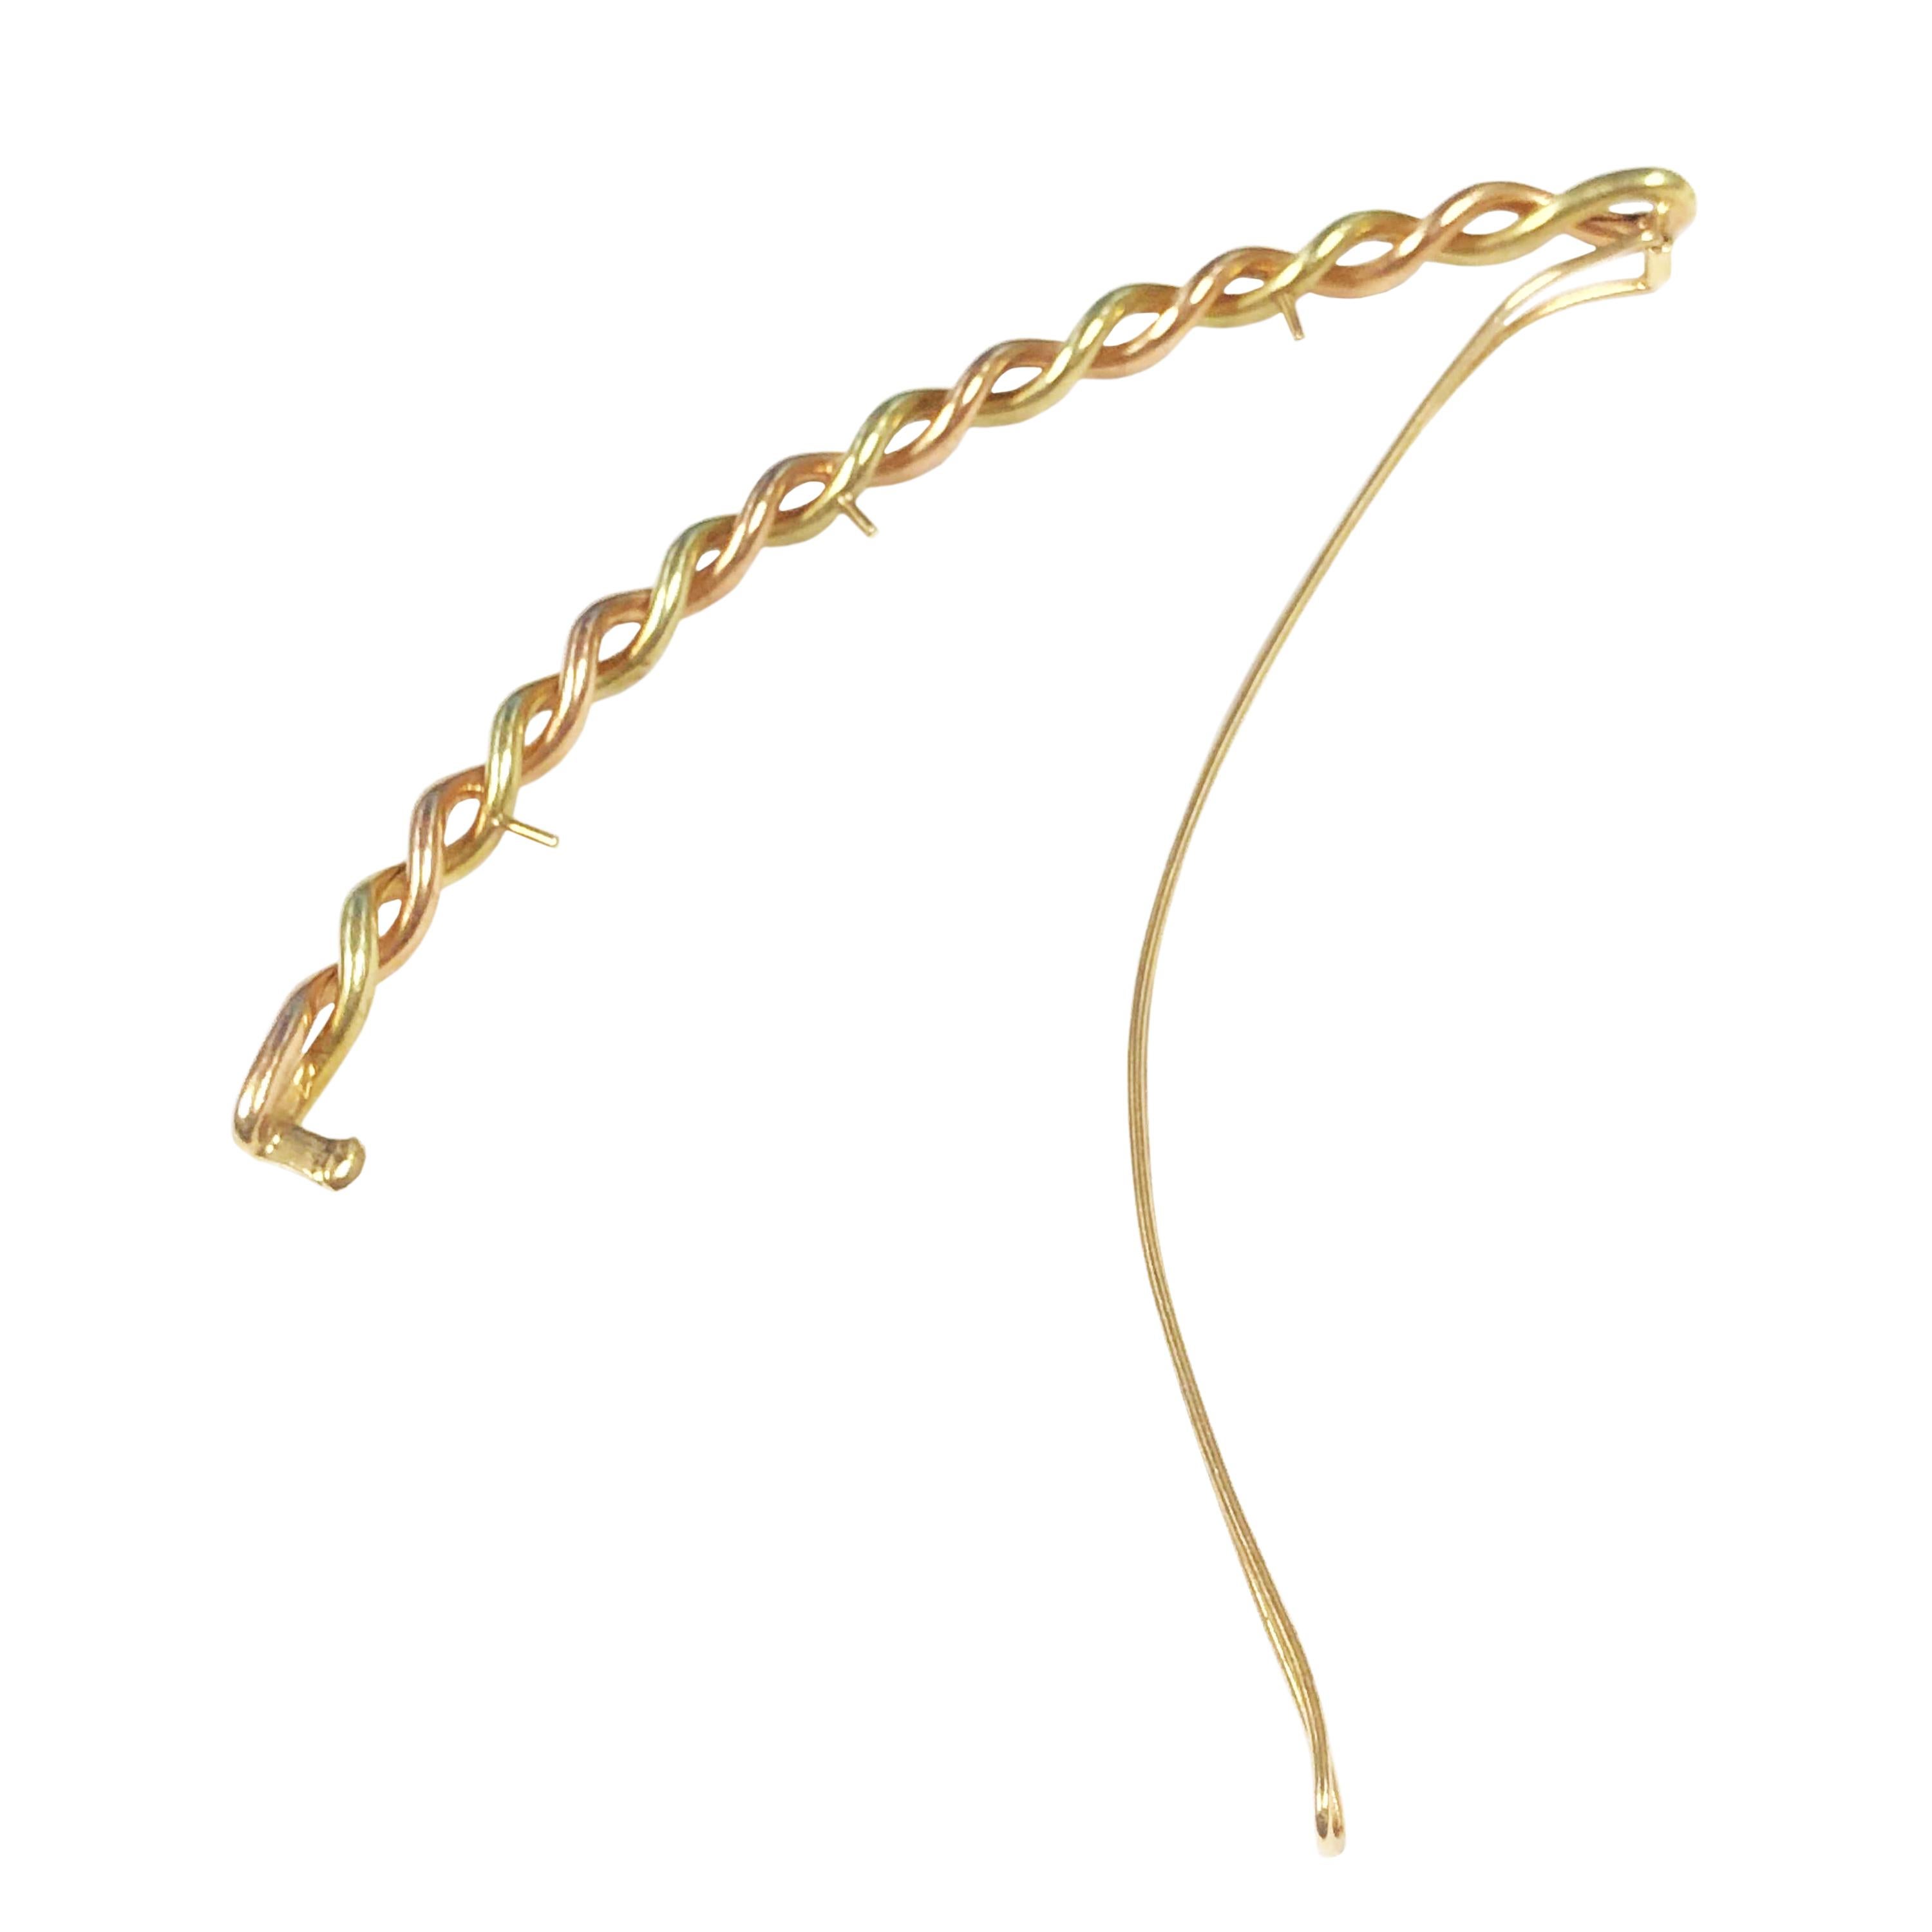 Circa 1940s Cartier 14K Rose and Green Gold Hair Barrette, measuring 4 3/4 inches in length and 3/16 inch wide. having a tight snap closure, signed and numbered. 